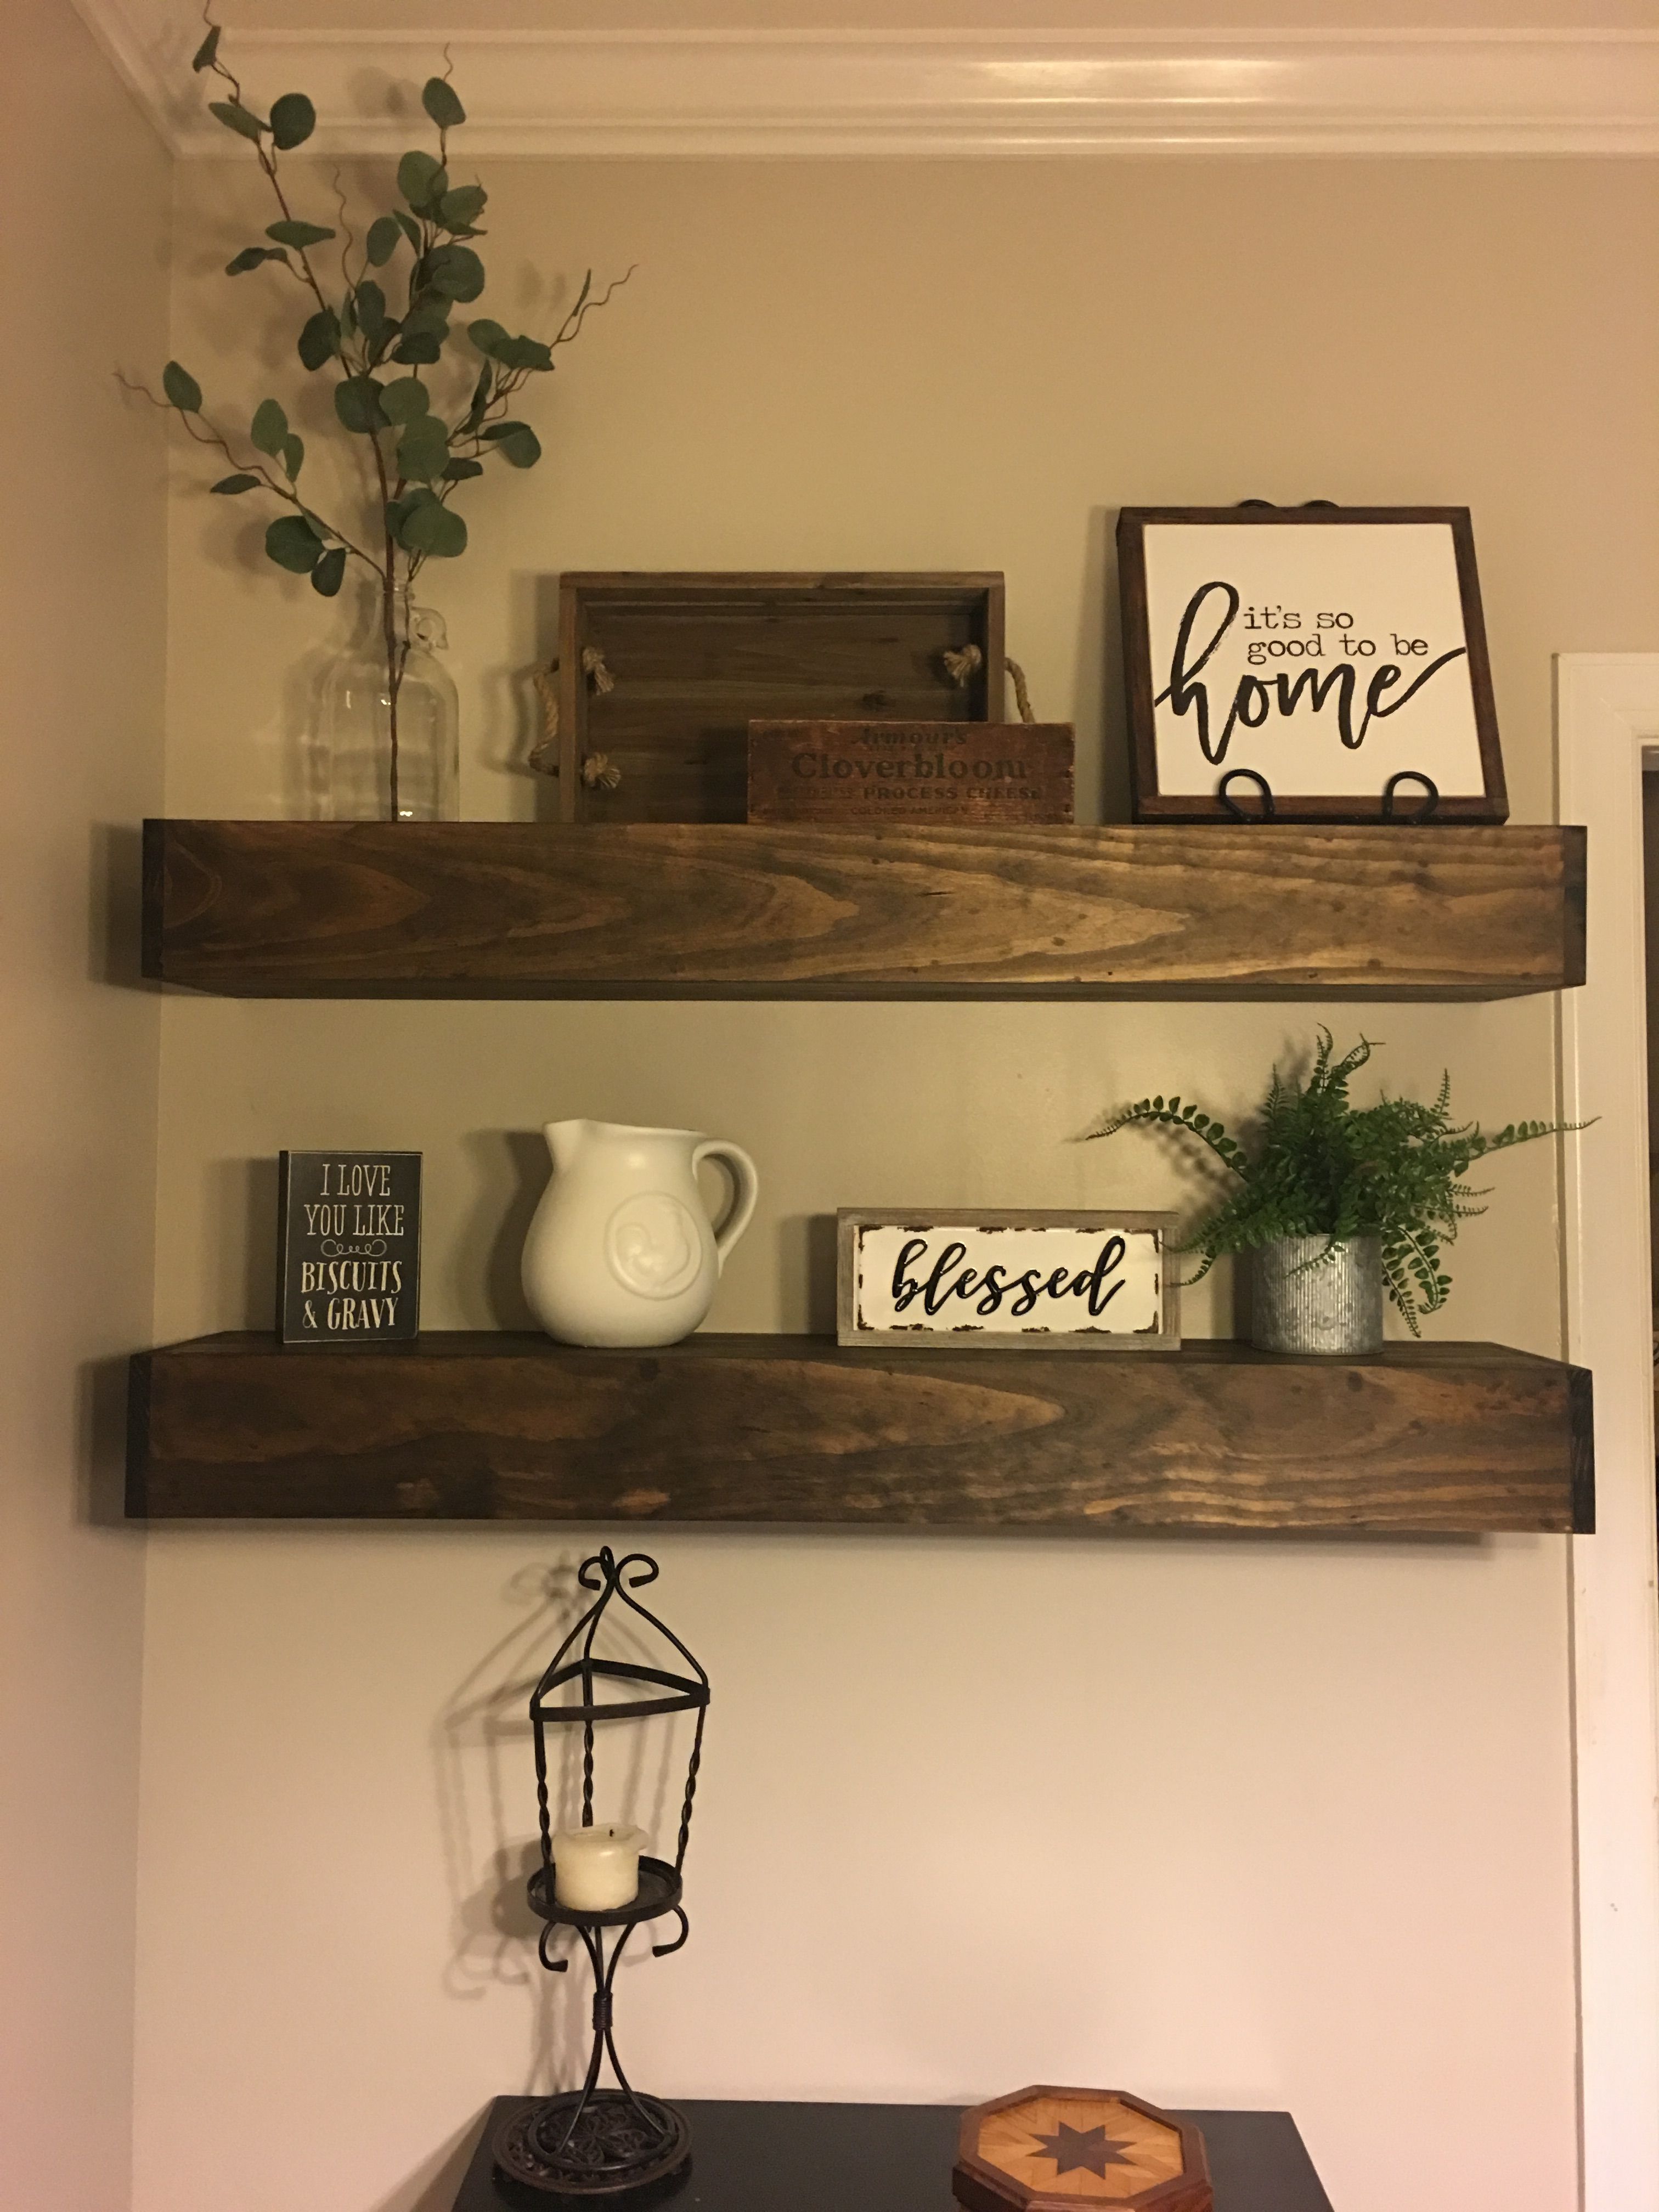 amazing diy ideas floating shelves bar industrial pipe for hallway cabinets black ture ledge shelf stand glass and chrome hat coat rack wall fixings lee valley hooks find racks